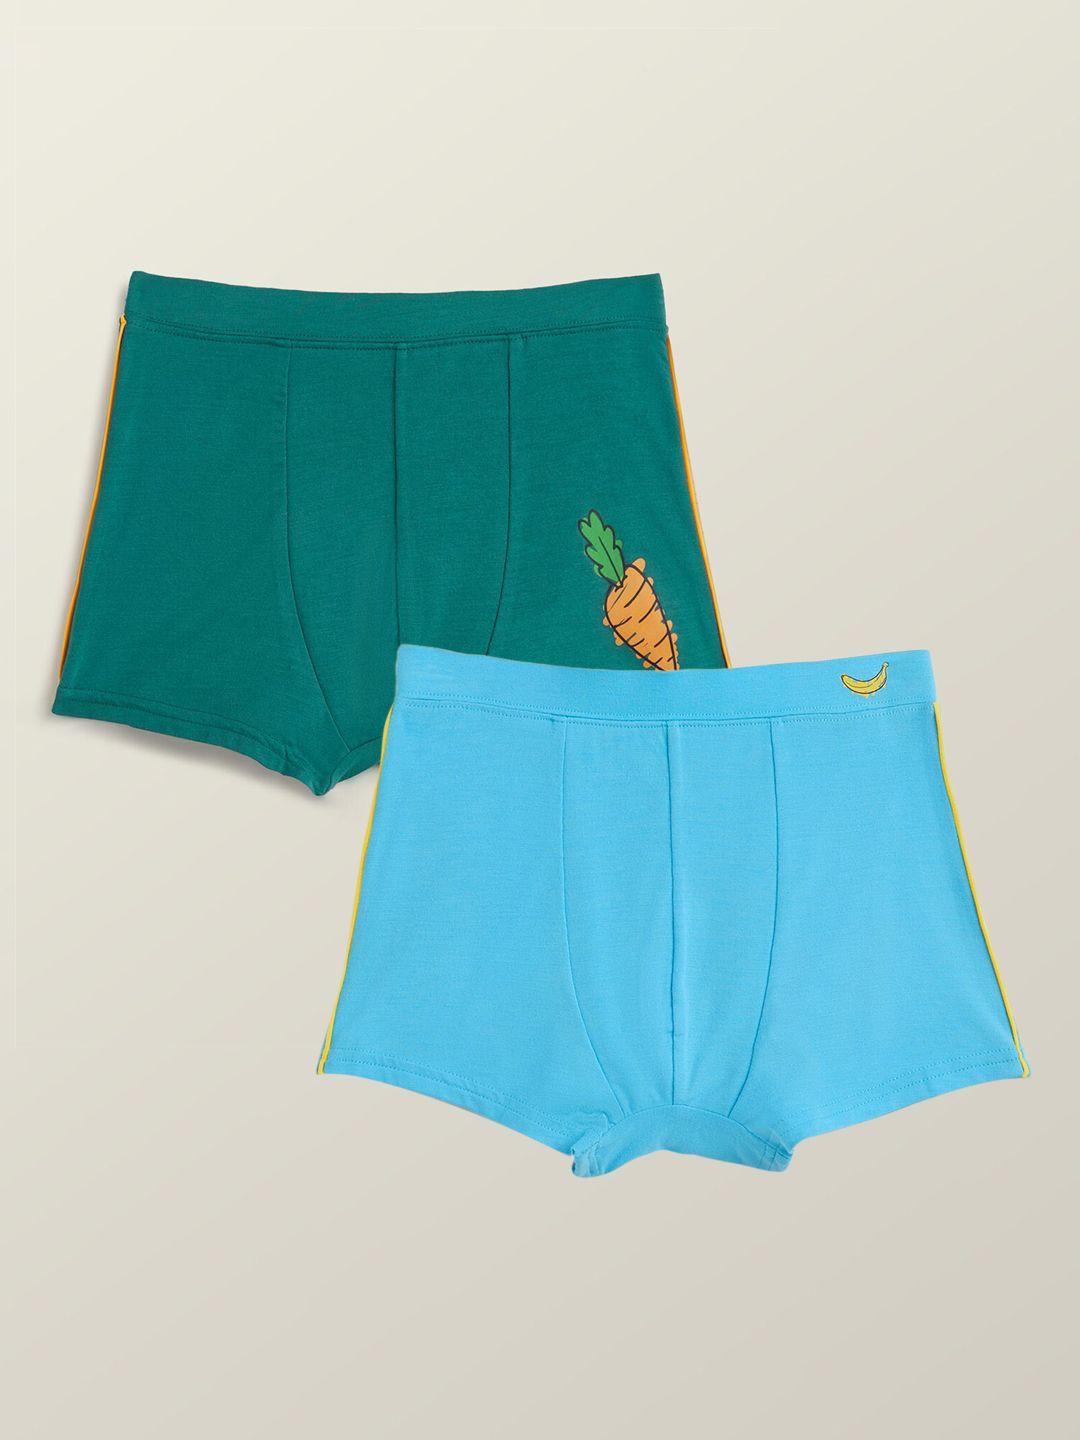 xy life boys blue & green pack of 2 solid trunk- lbtrnk2pckn04